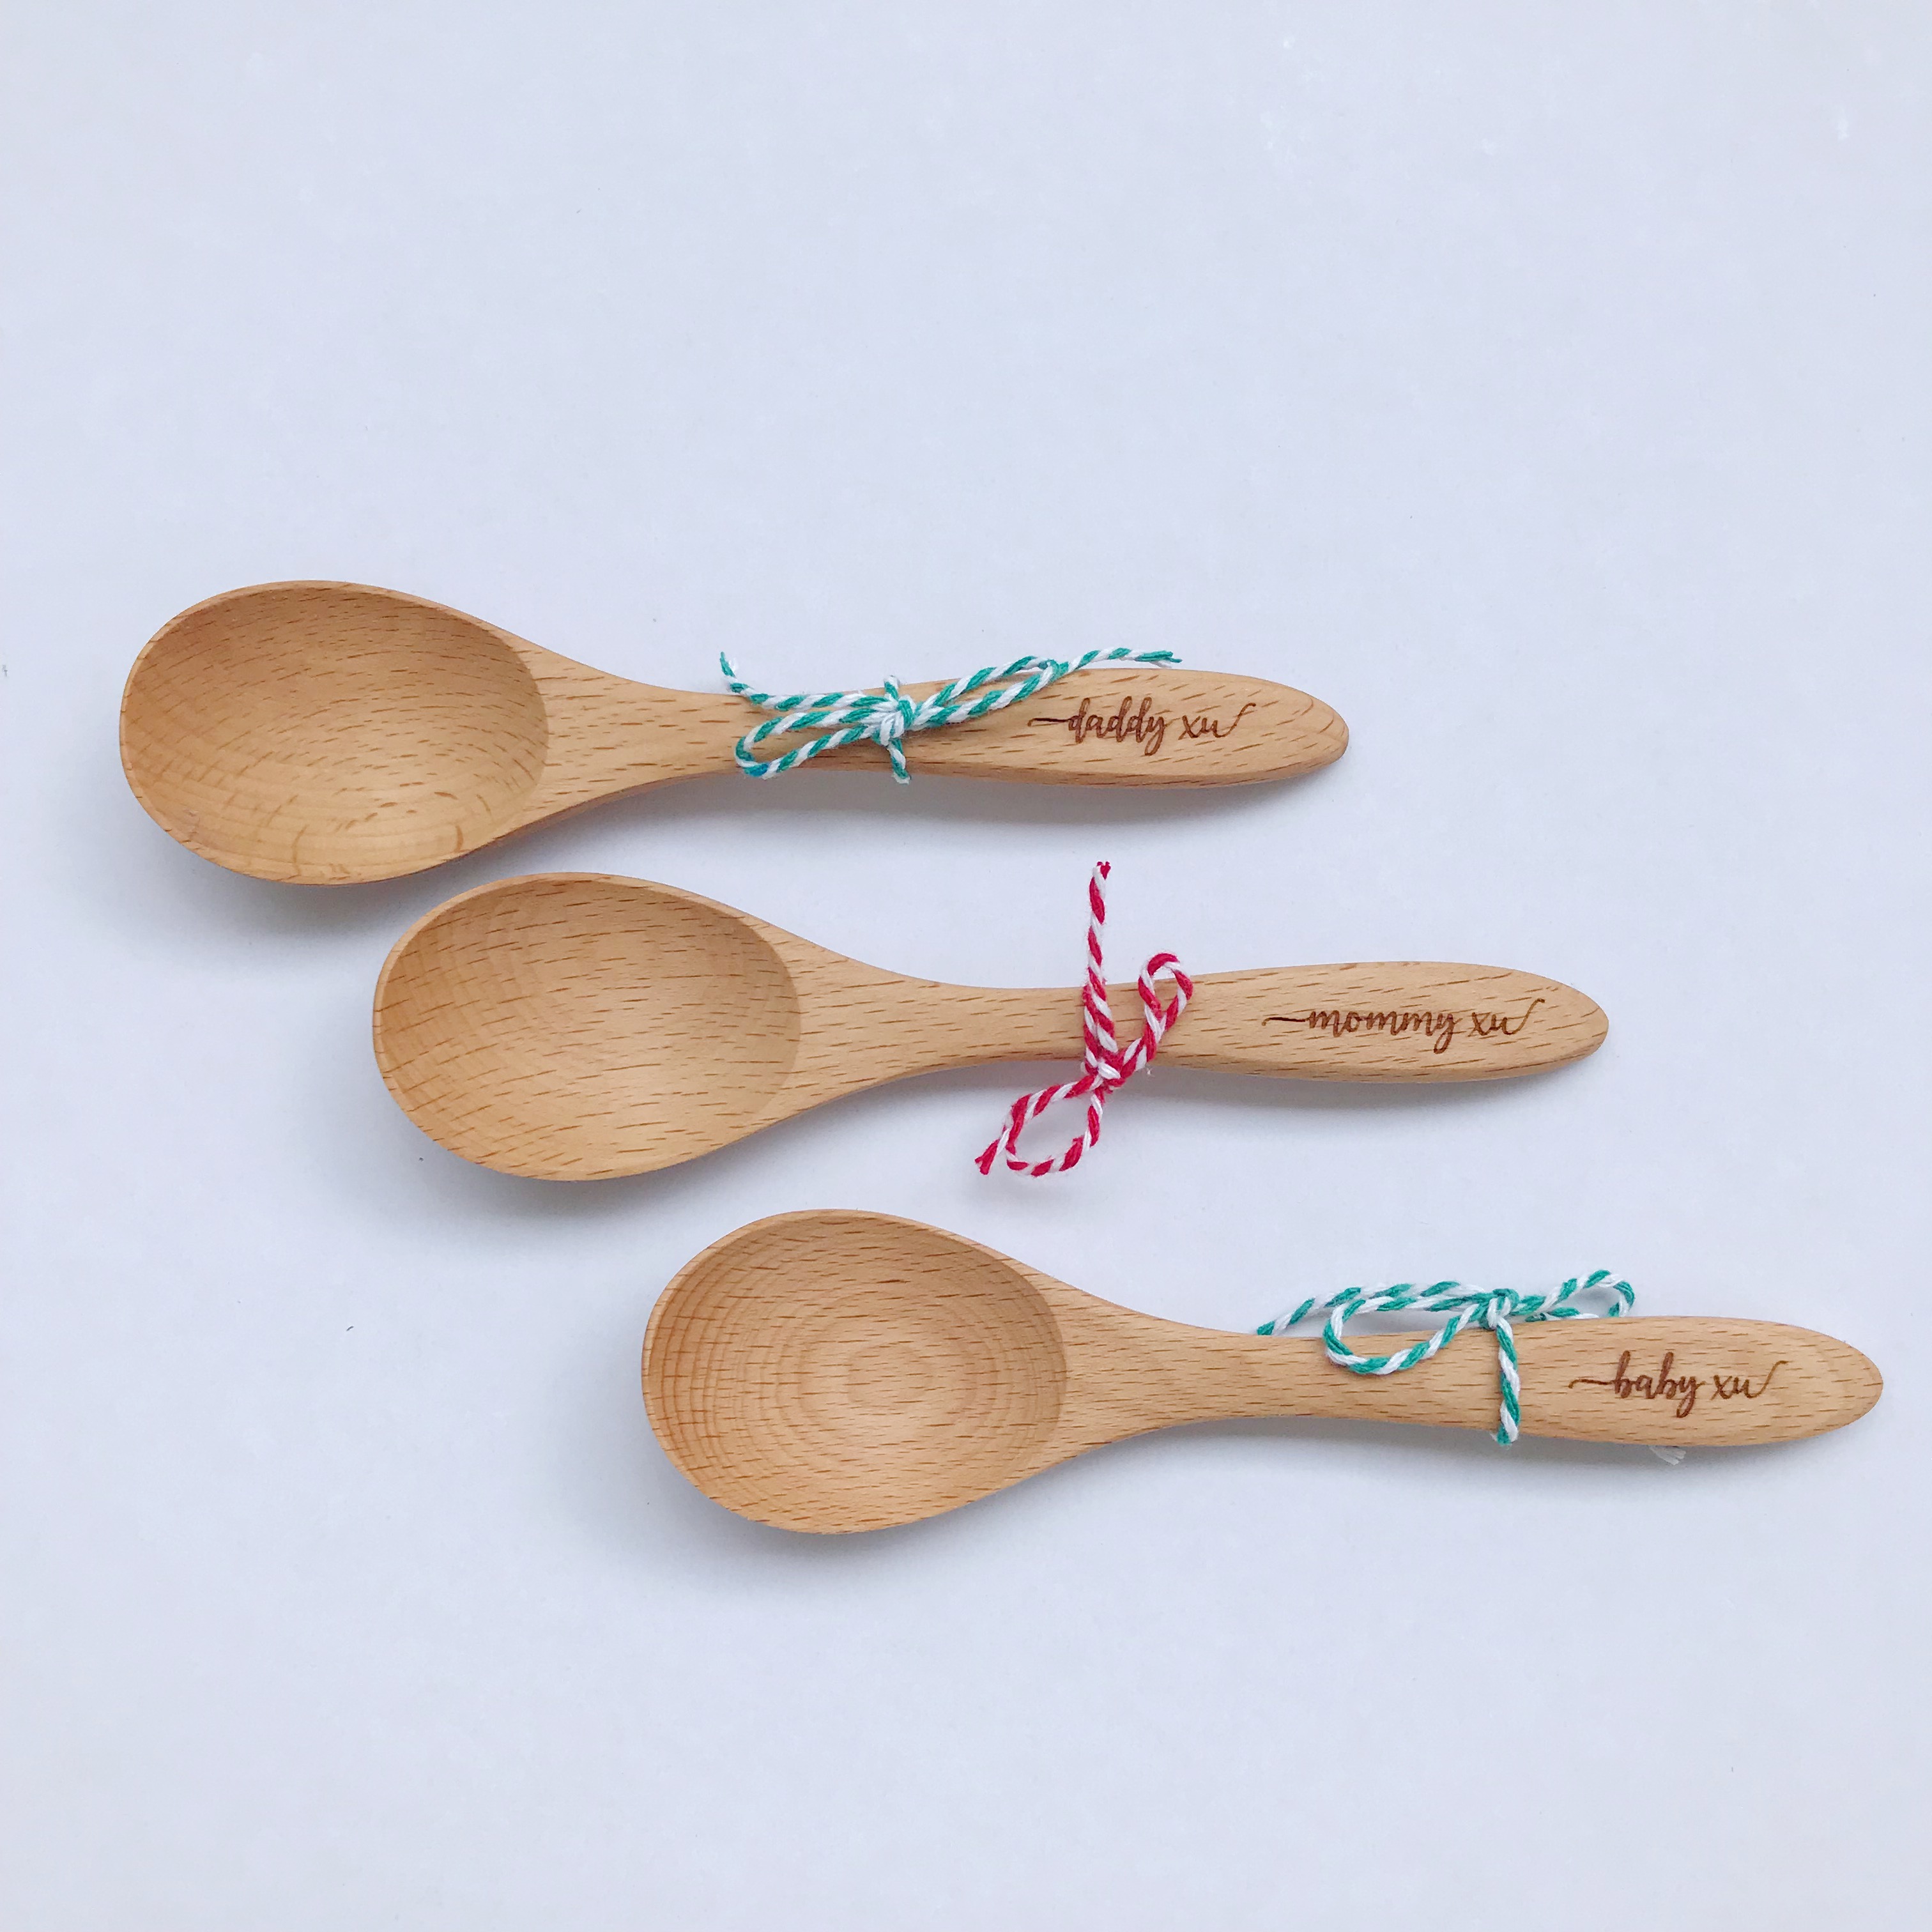 Engraved Wooden Spoon - Ohfriday!